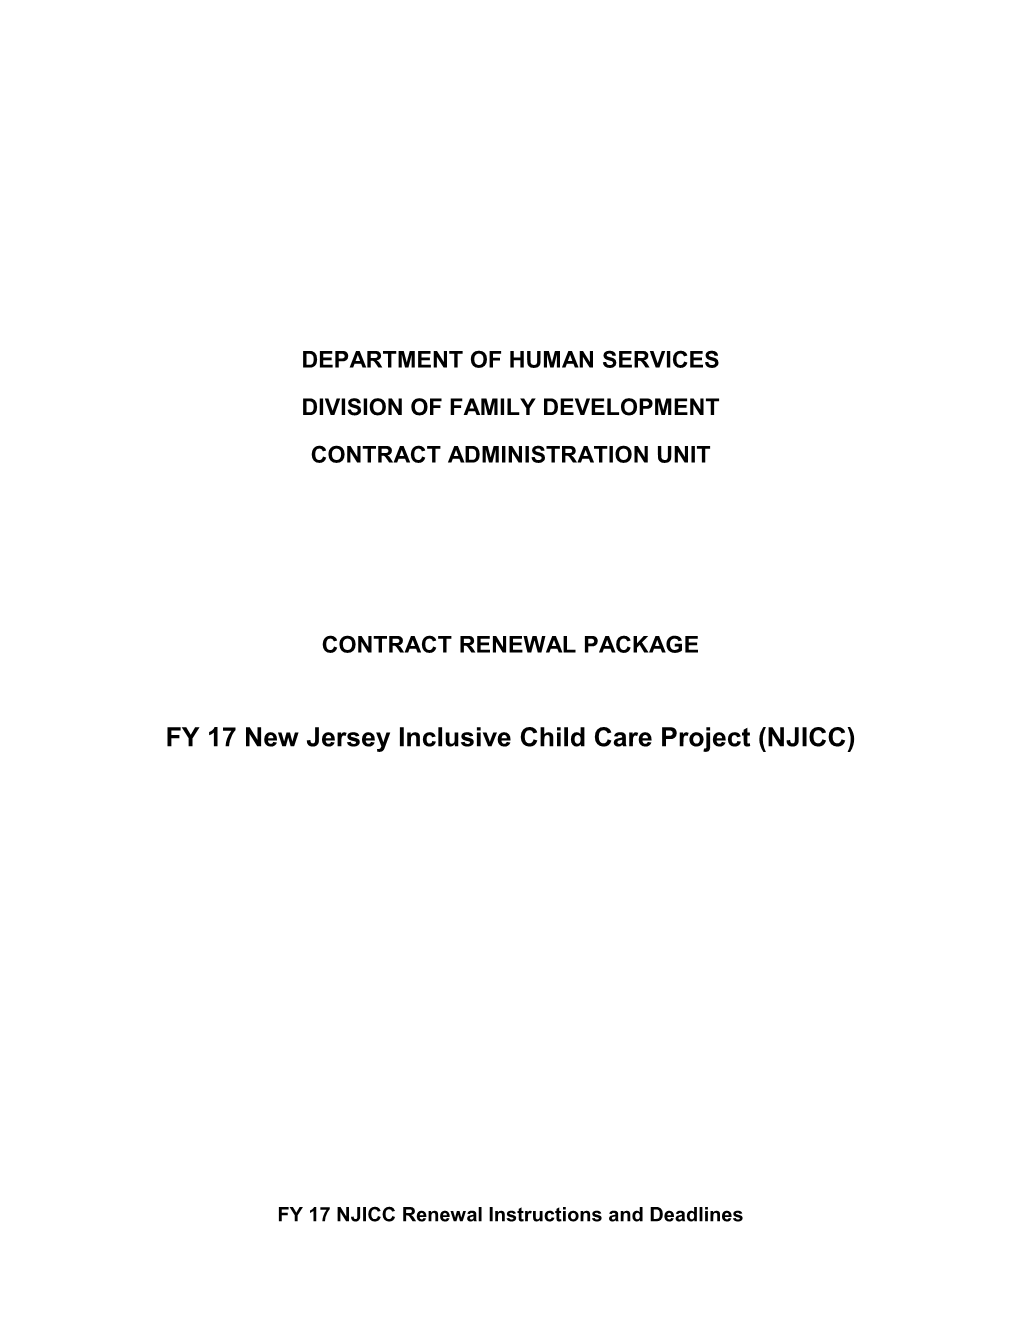 Department of Human Services s23